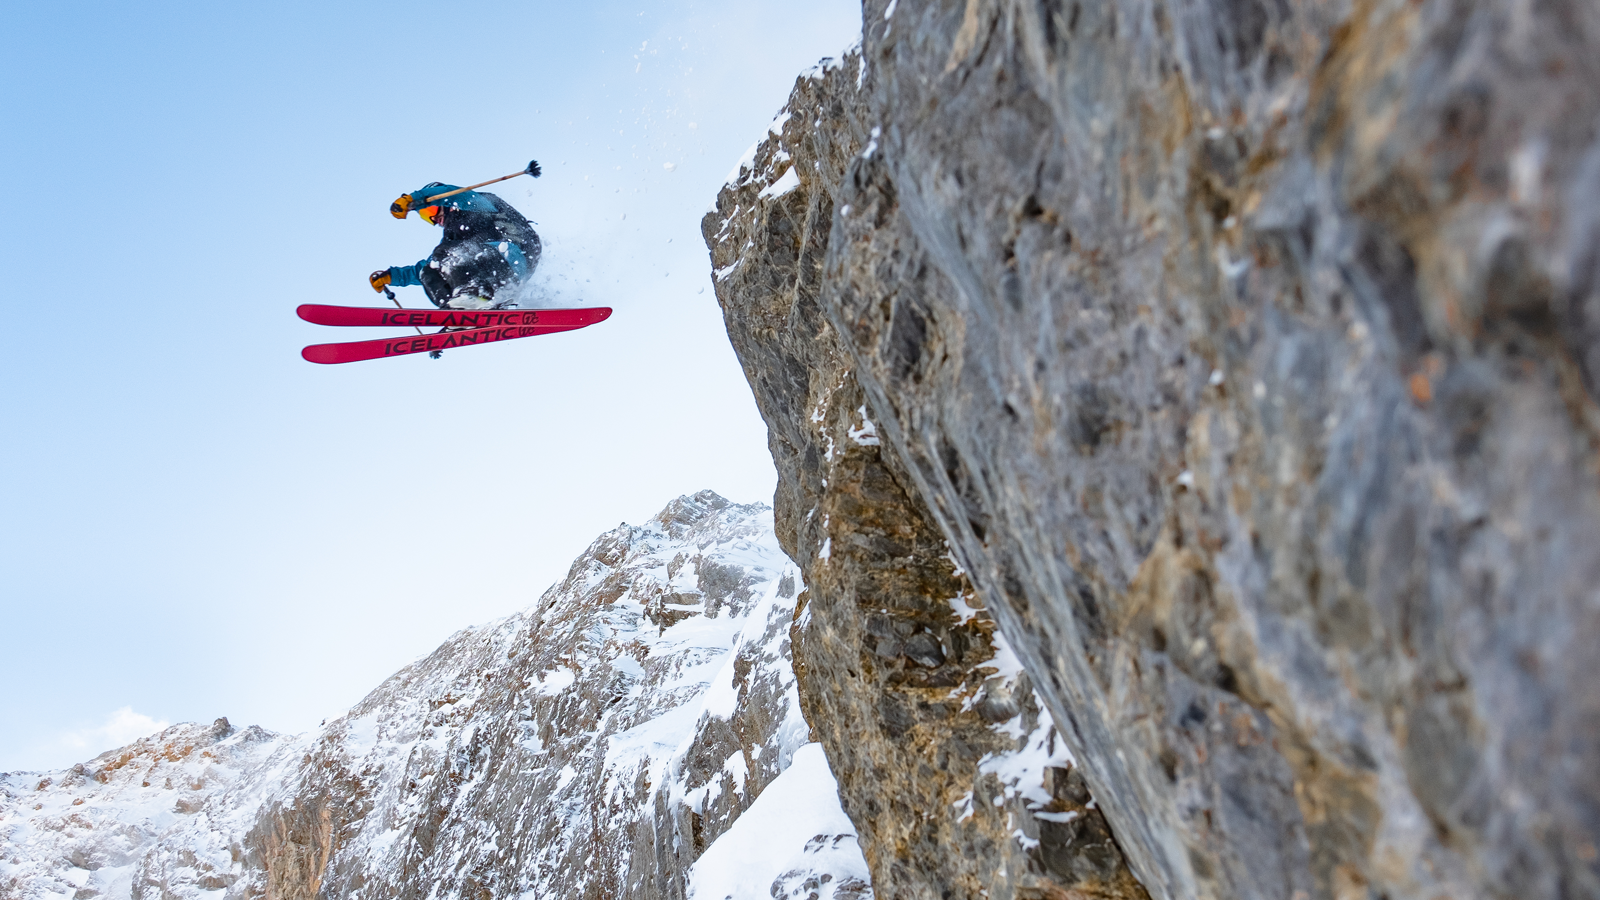 Trip report: Icelantic Skis tests new pro model twigs in Switzerland ...